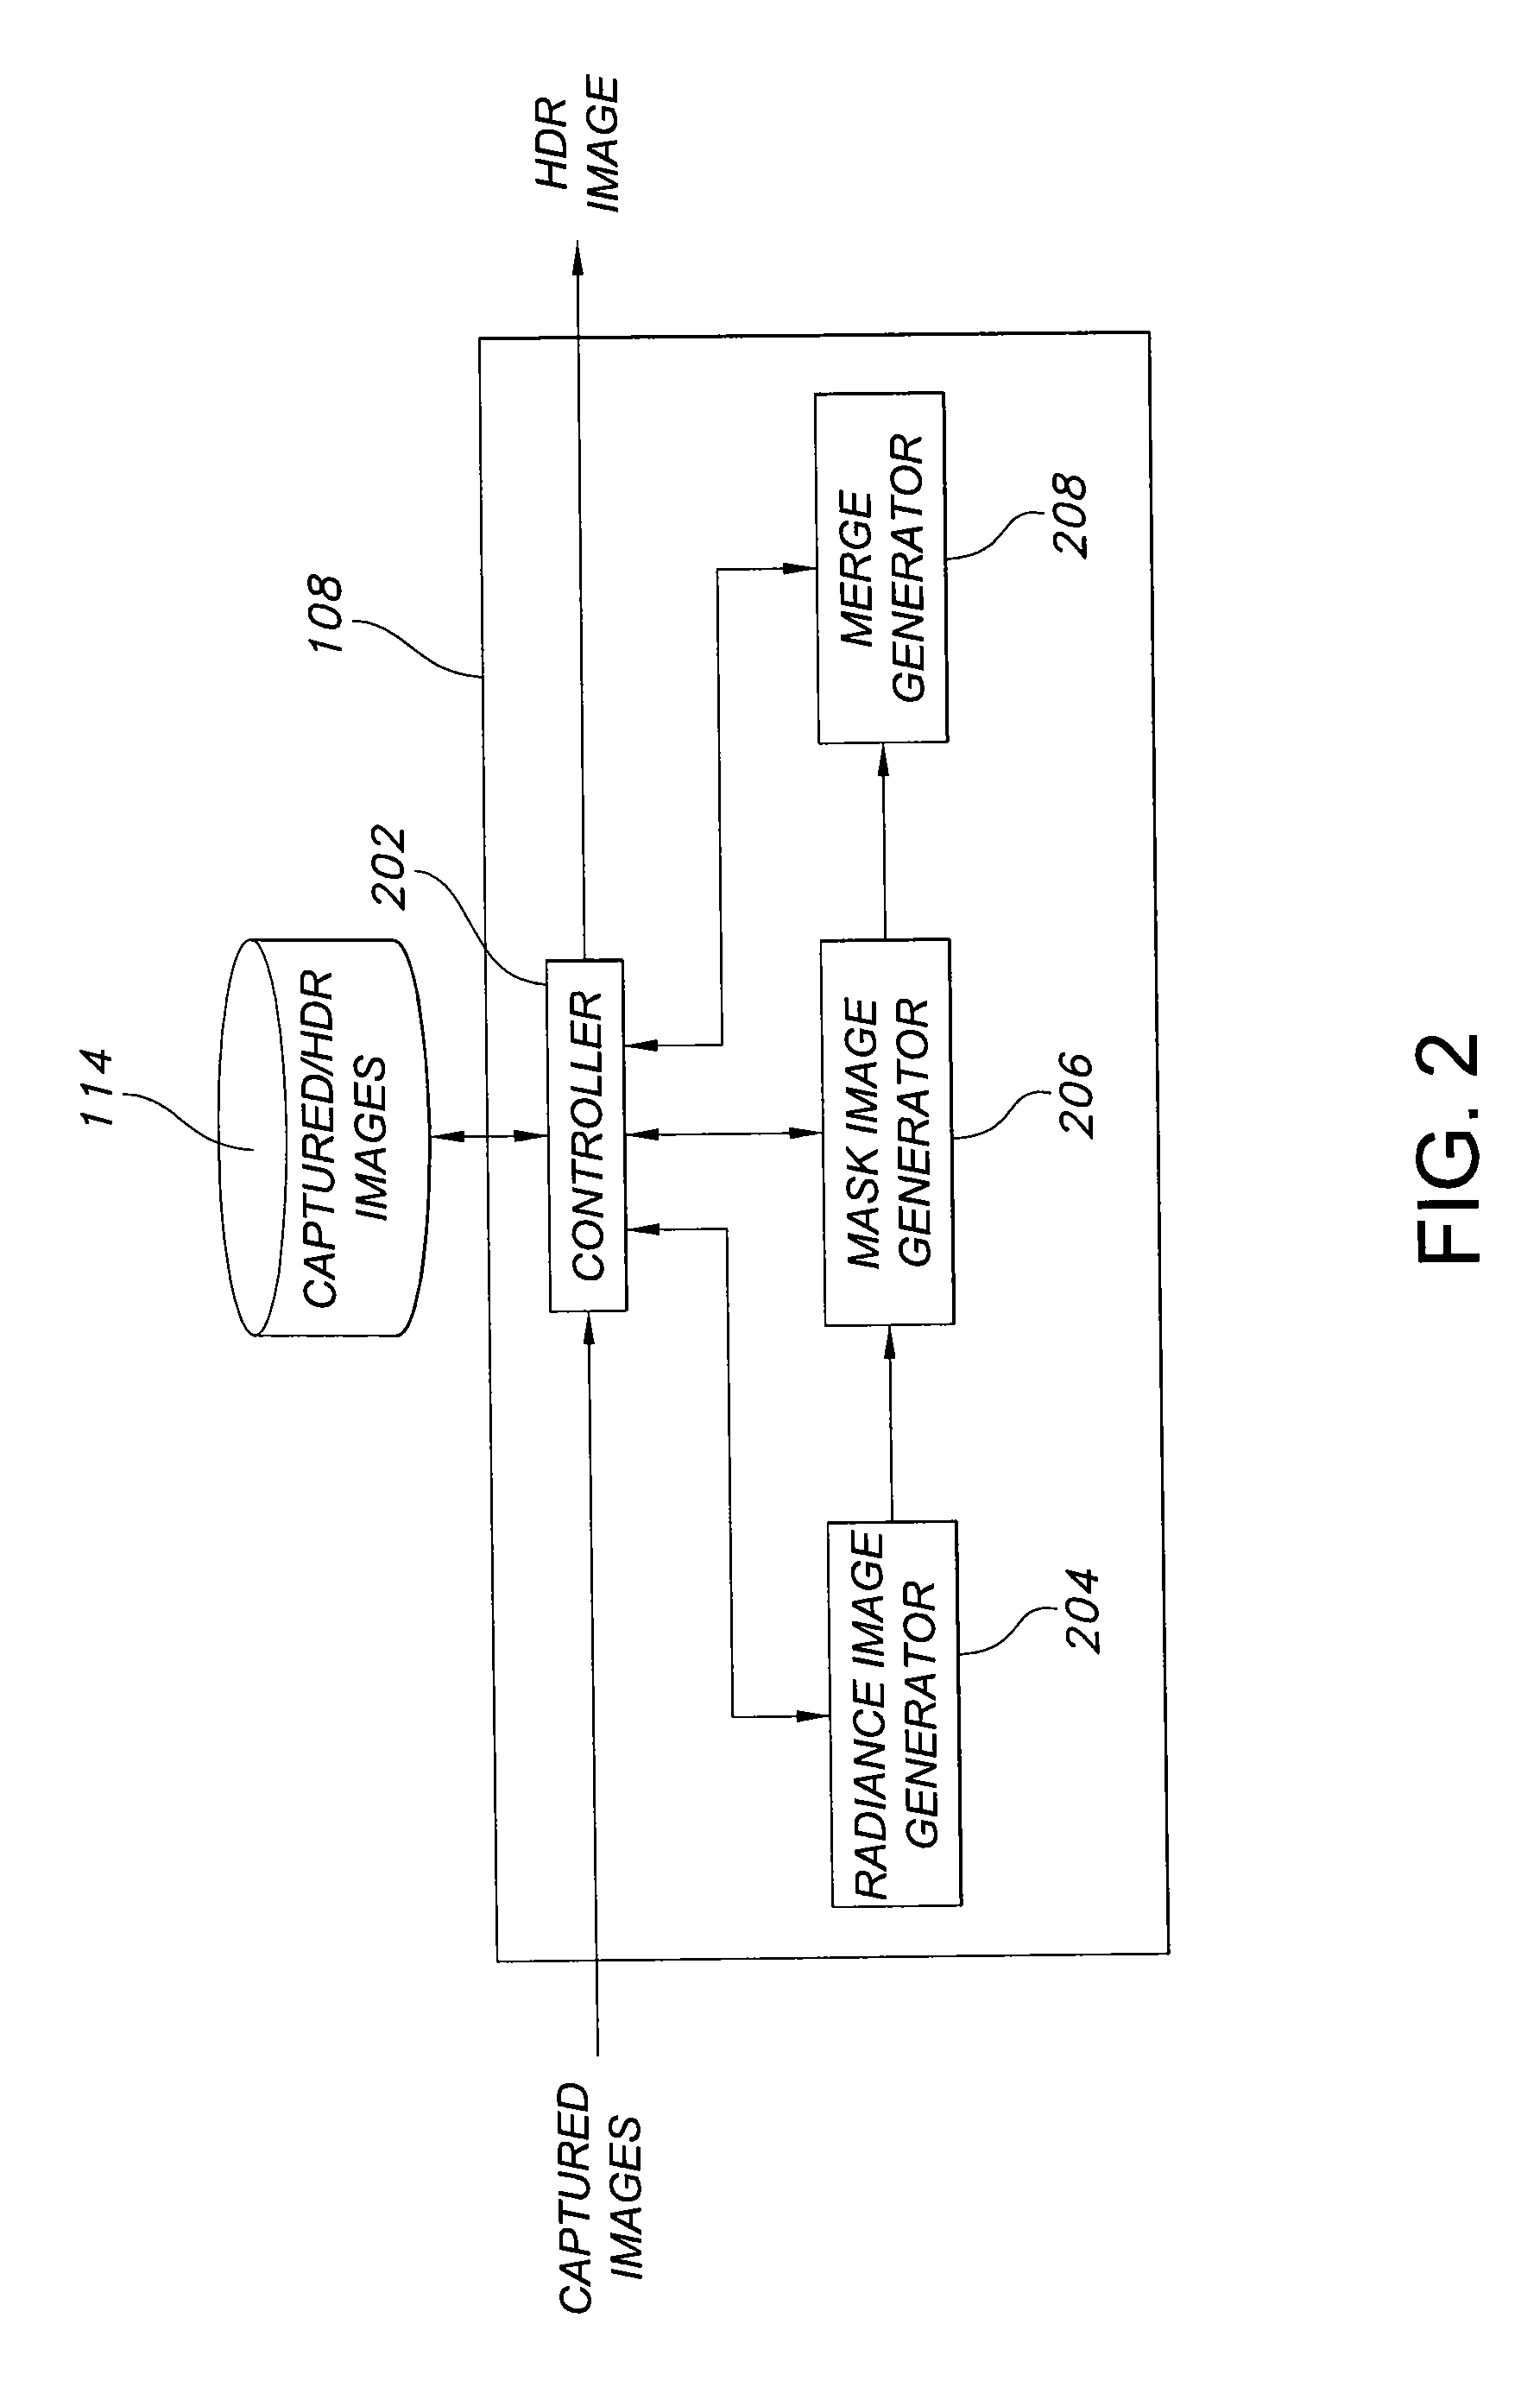 Method of capturing high dynamic range images with objects in the scene